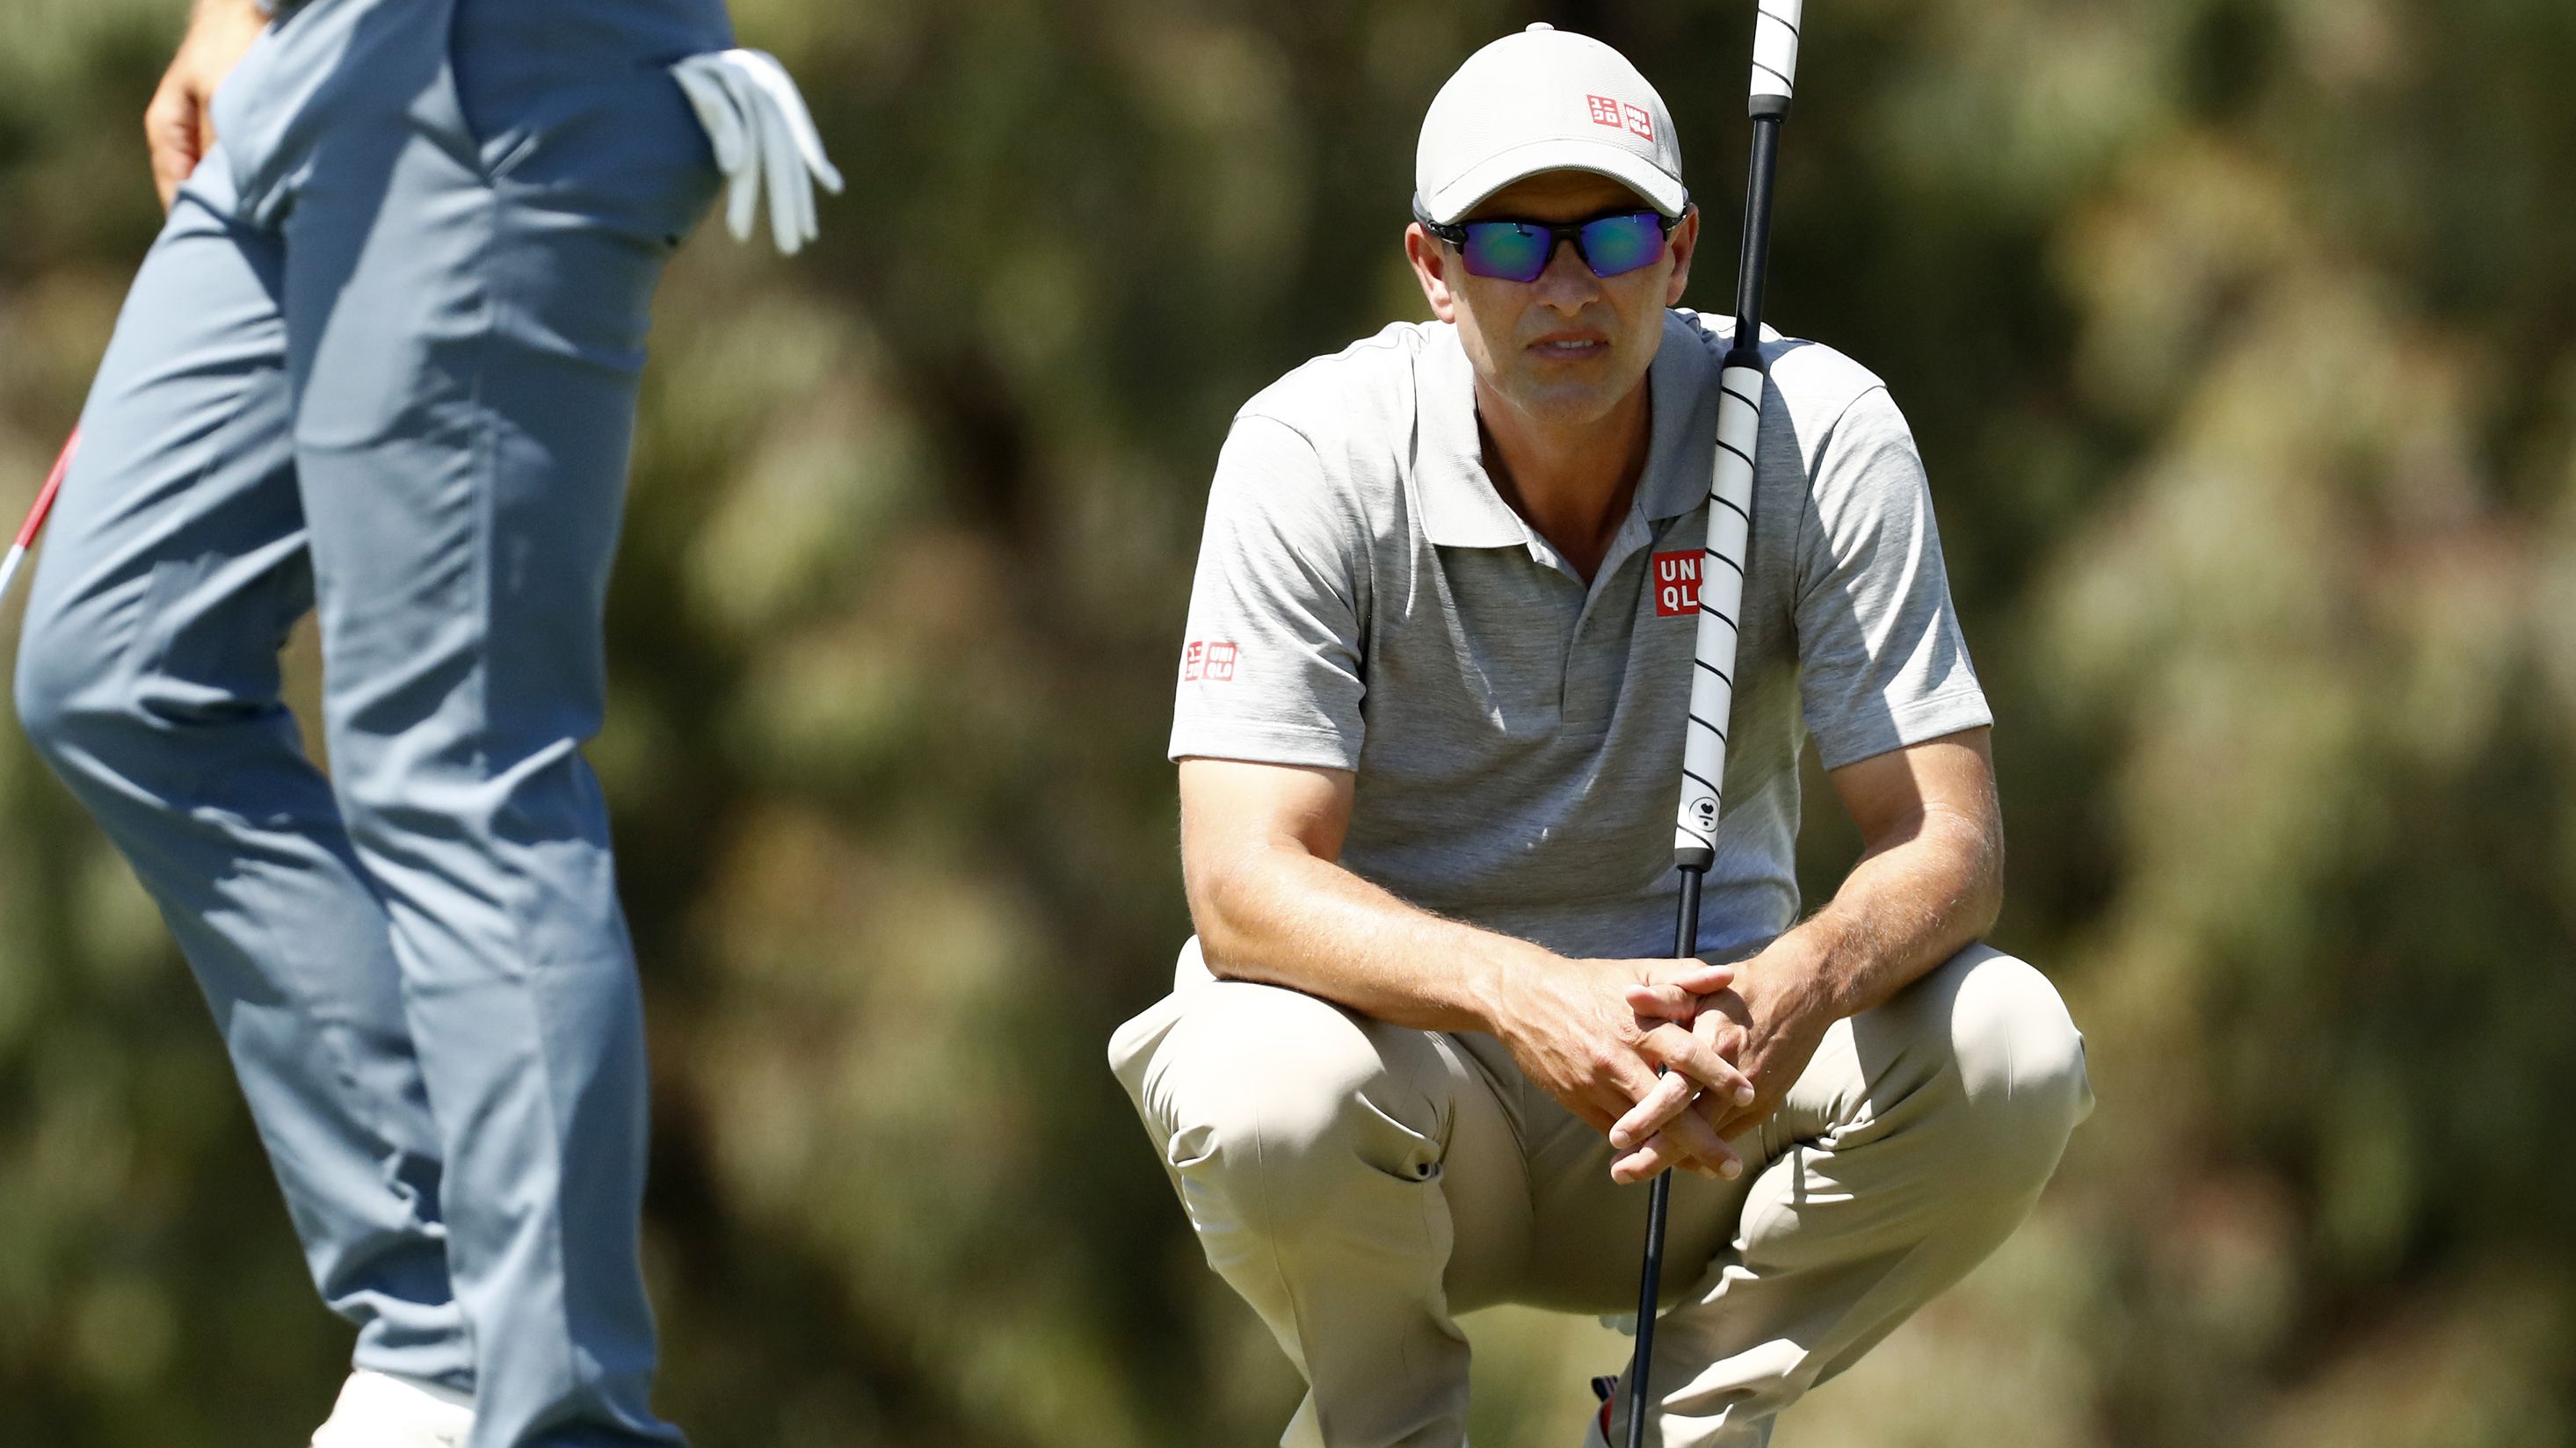 Adam Scott flopped on day four of the Australian Open. (Photo by Darrian Traynor/Getty Images)